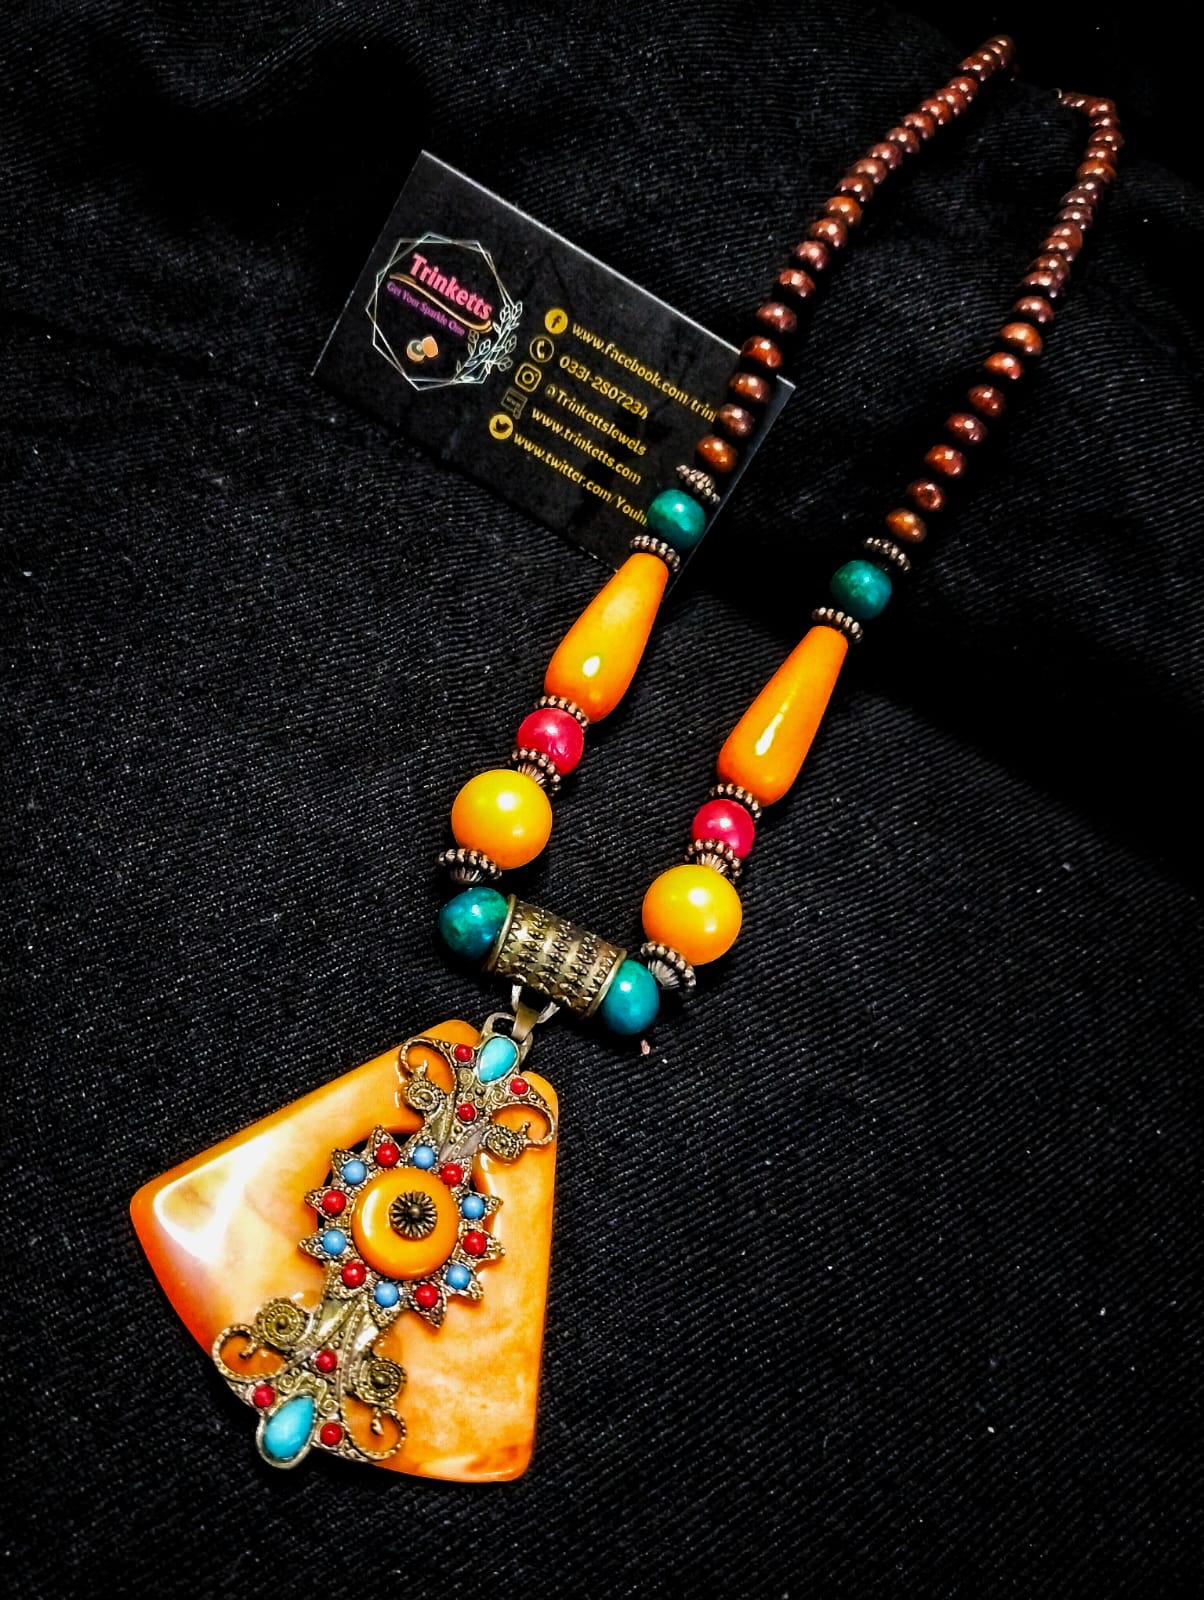 Triangular orange pendant with intricate bronze alloy design, accented by wooden and plastic beads in shades of brown, orange, and red, alongside elongated orange beads.